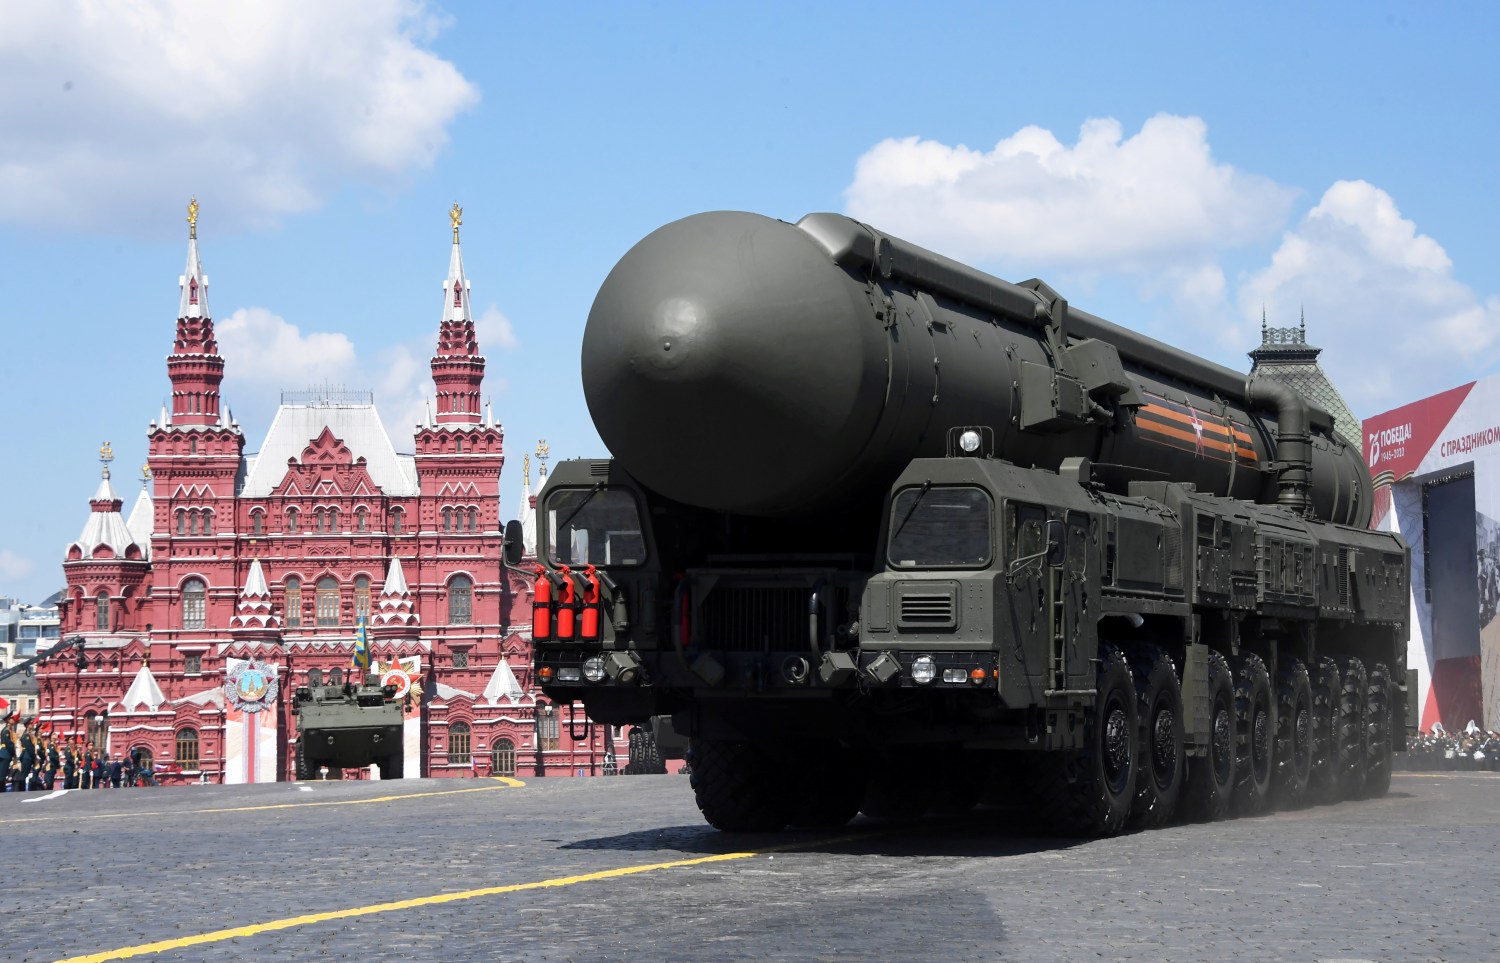 FILE PHOTO: A Russian Yars intercontinental ballistic missile system drives during the Victory Day Parade in Red Square in Moscow, Russia, June 24, 2020. The military parade, marking the 75th anniversary of the victory over Nazi Germany in World War Two, was scheduled for May 9 but postponed due to the outbreak of the coronavirus disease (COVID-19). Host photo agency/Iliya Pitalev via REUTERS